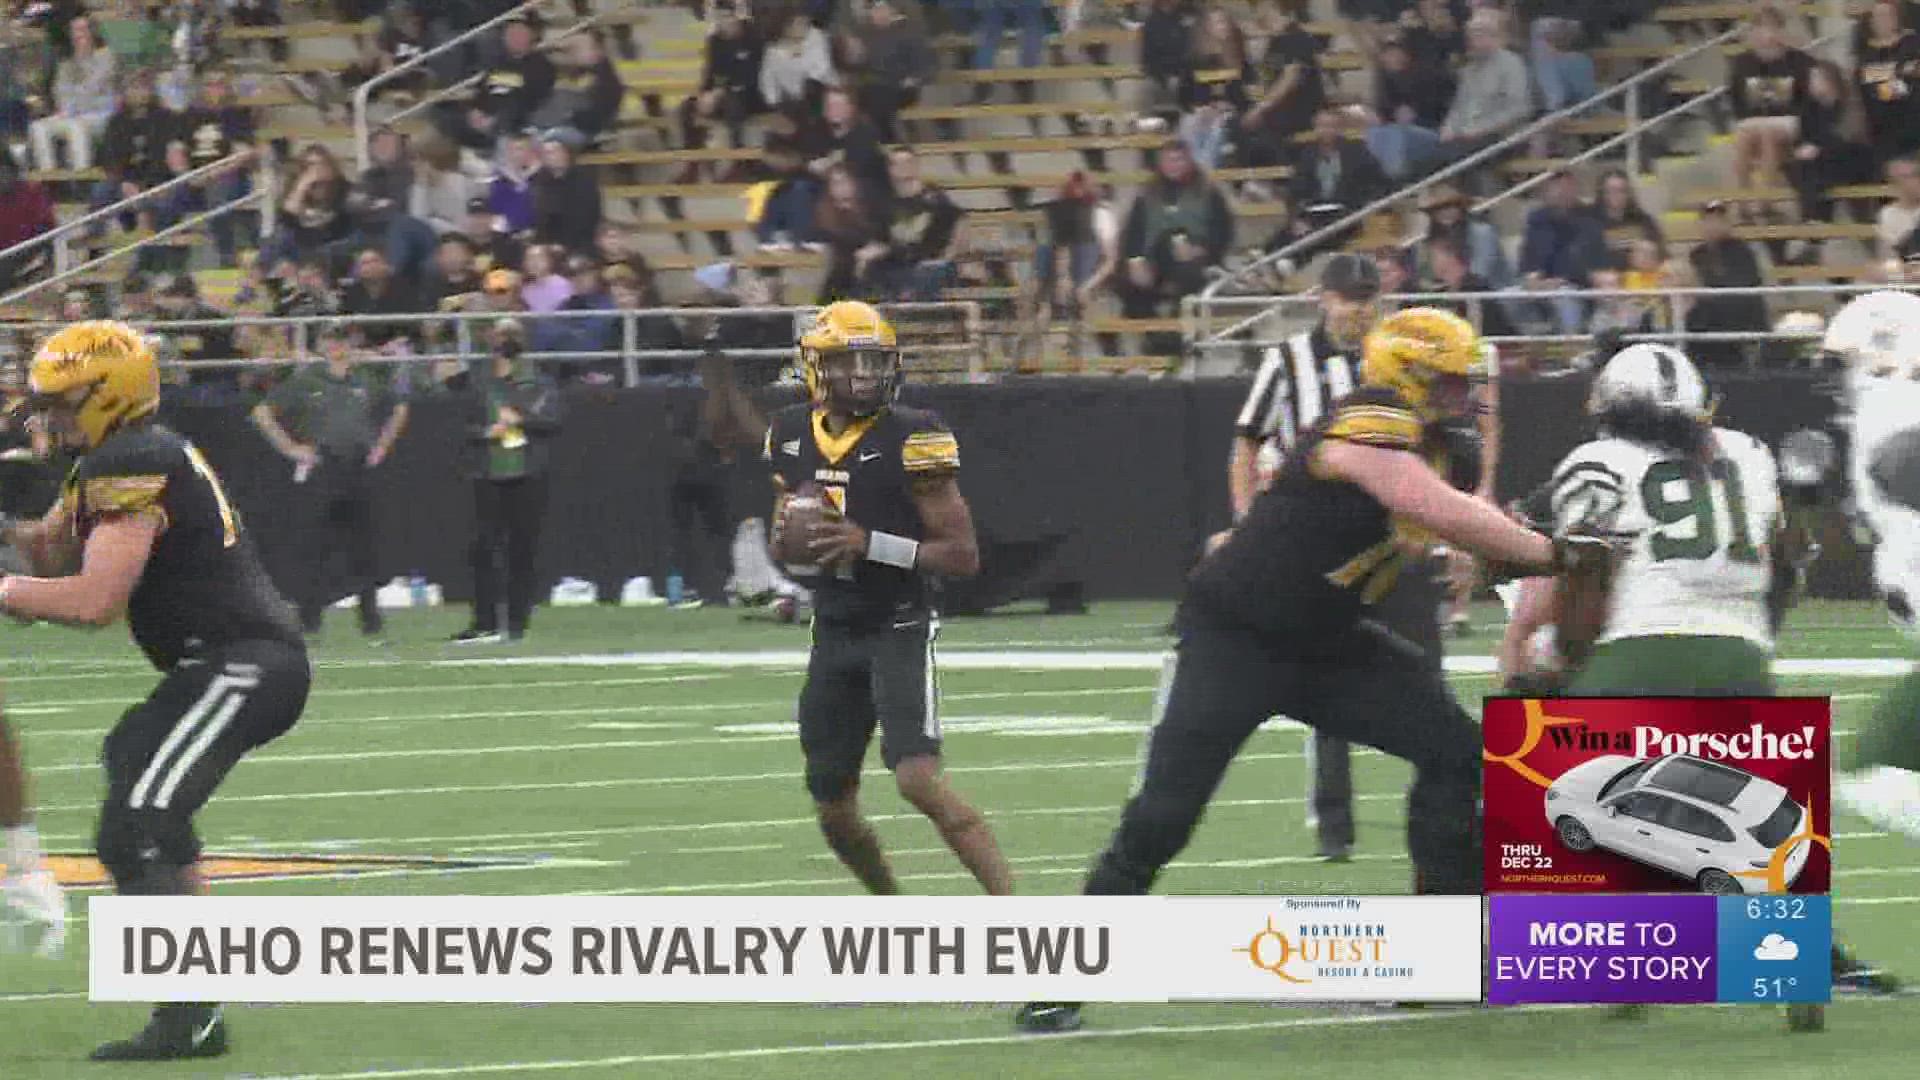 While the two teams' seasons have headed in different directions, the Vandals are not taking their upcoming matchup with EWU lightly.